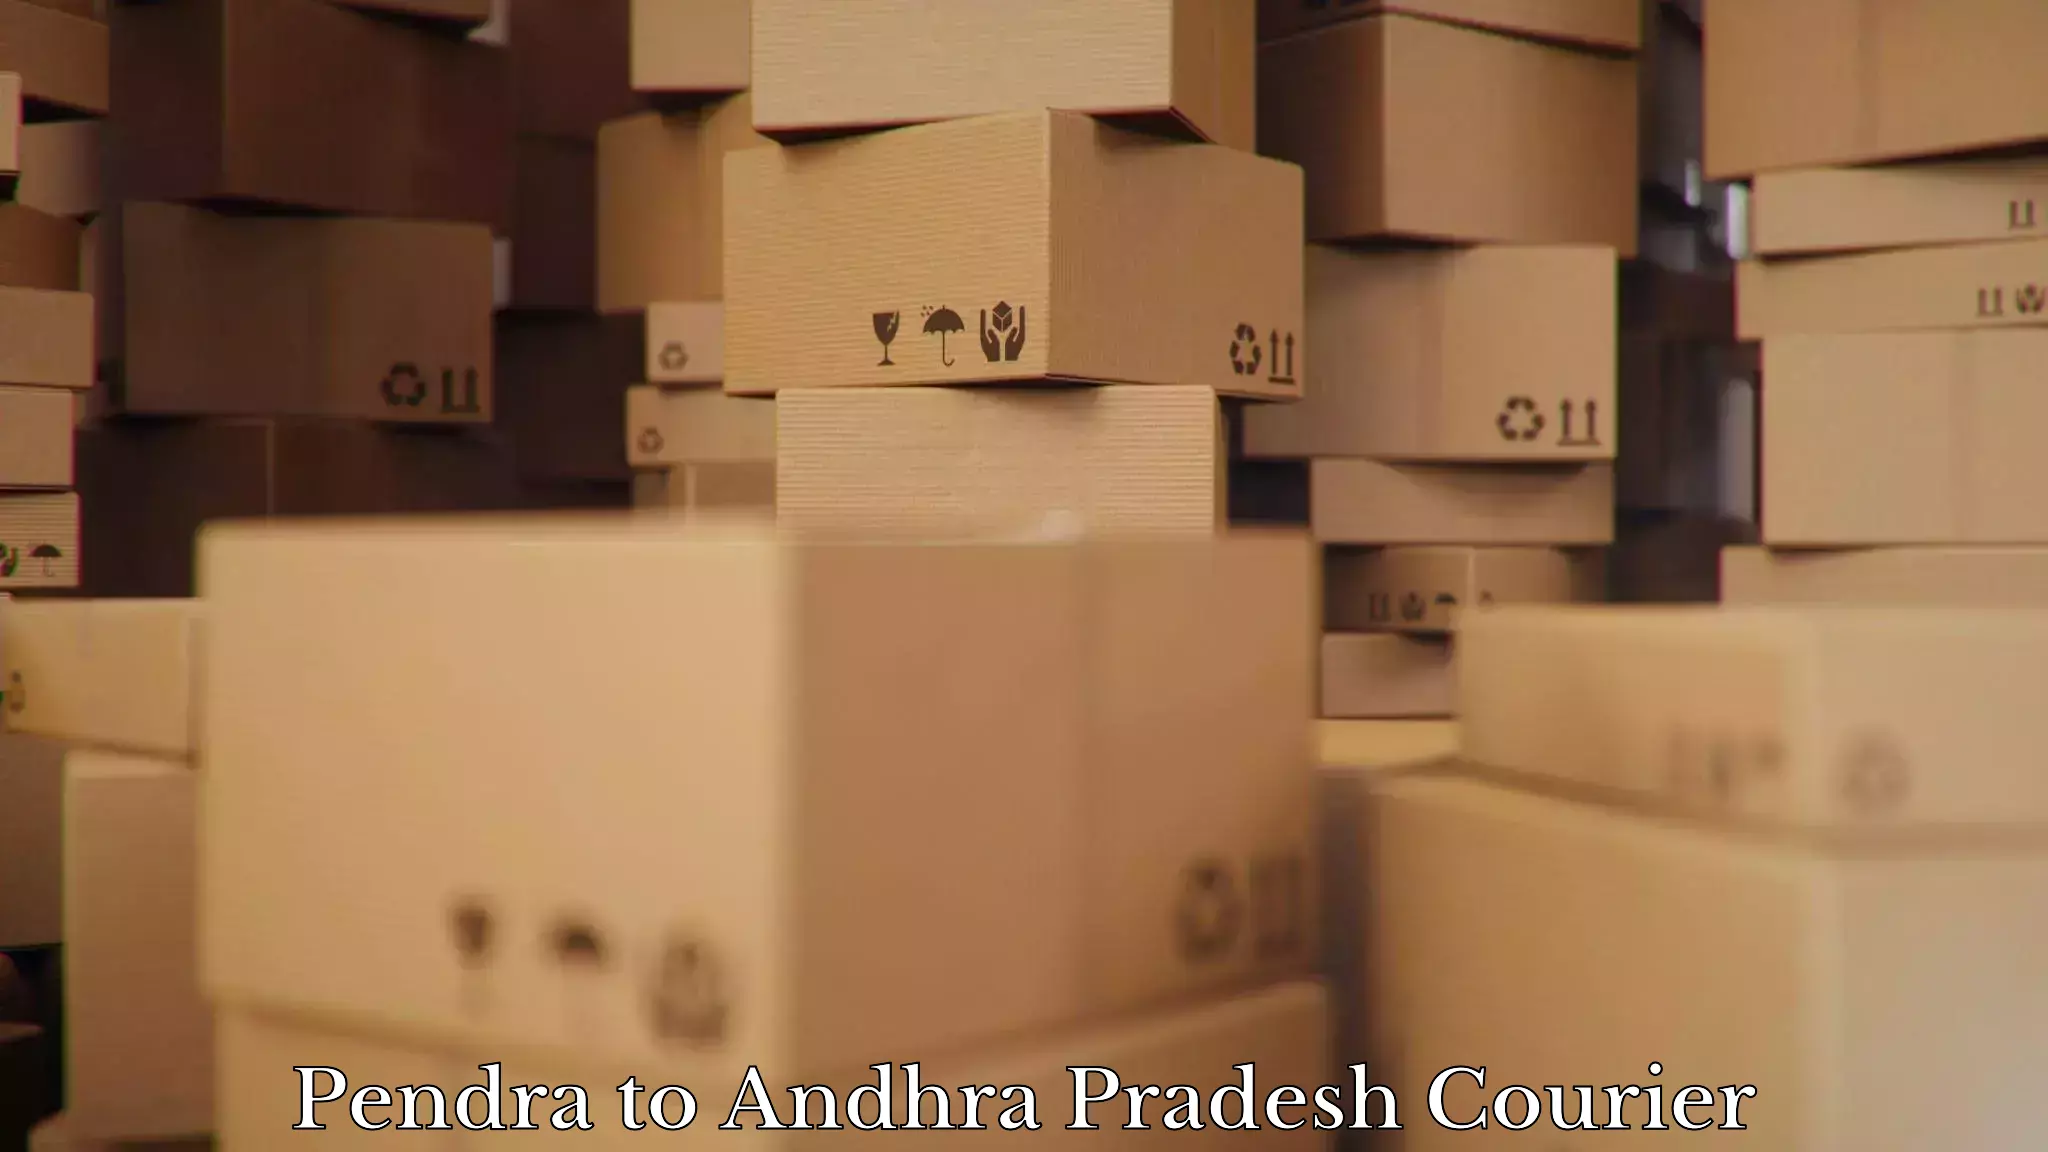 Quality relocation services Pendra to Visakhapatnam Port